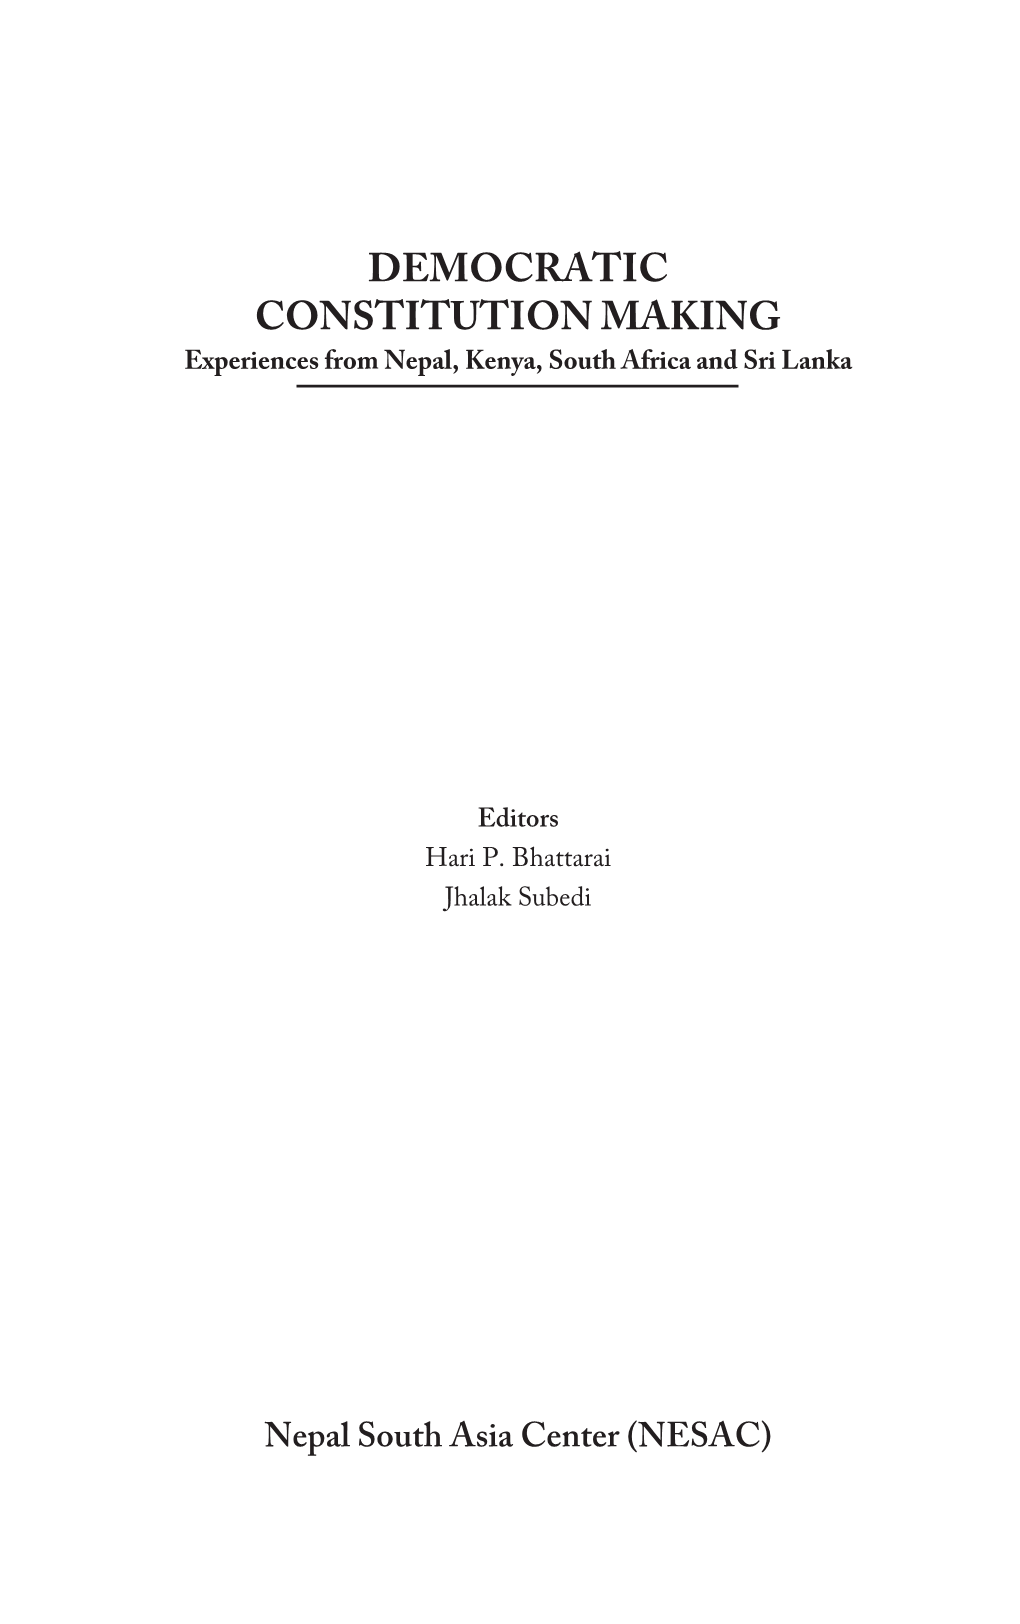 DEMOCRATIC CONSTITUTION MAKING Experiences from Nepal, Kenya, South Africa and Sri Lanka